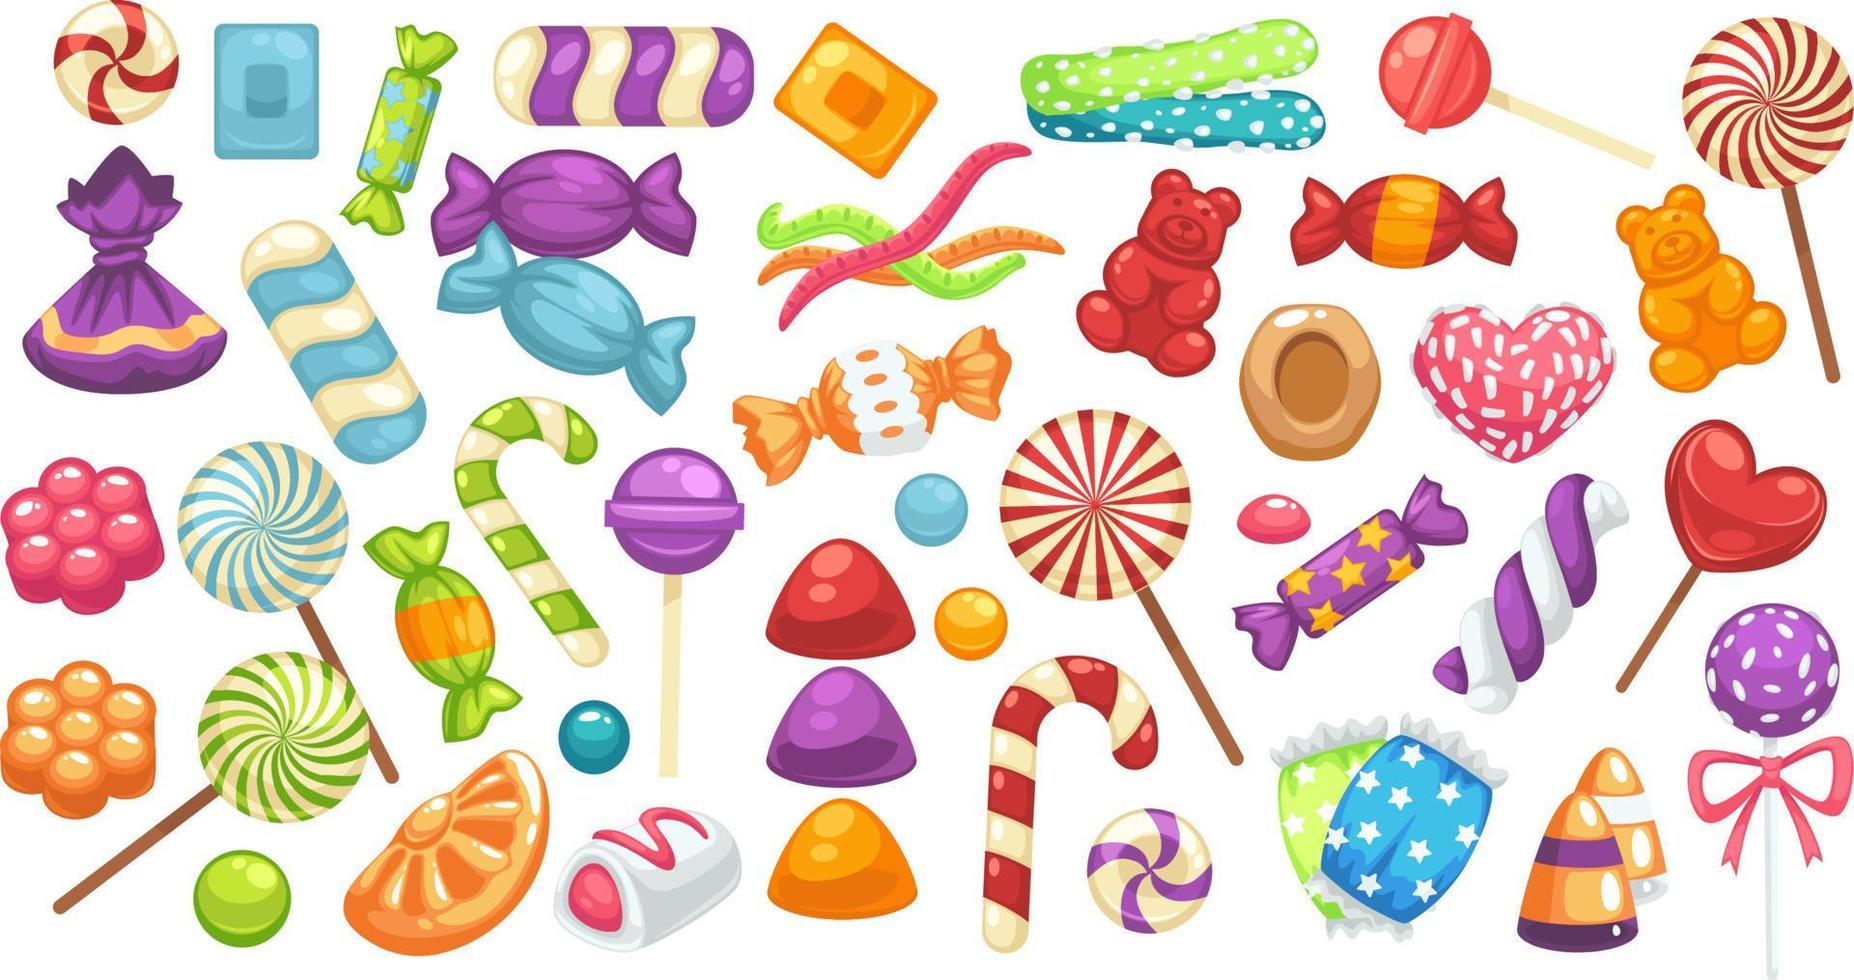 Sweets and candies, lollipops and bonbons variety vector